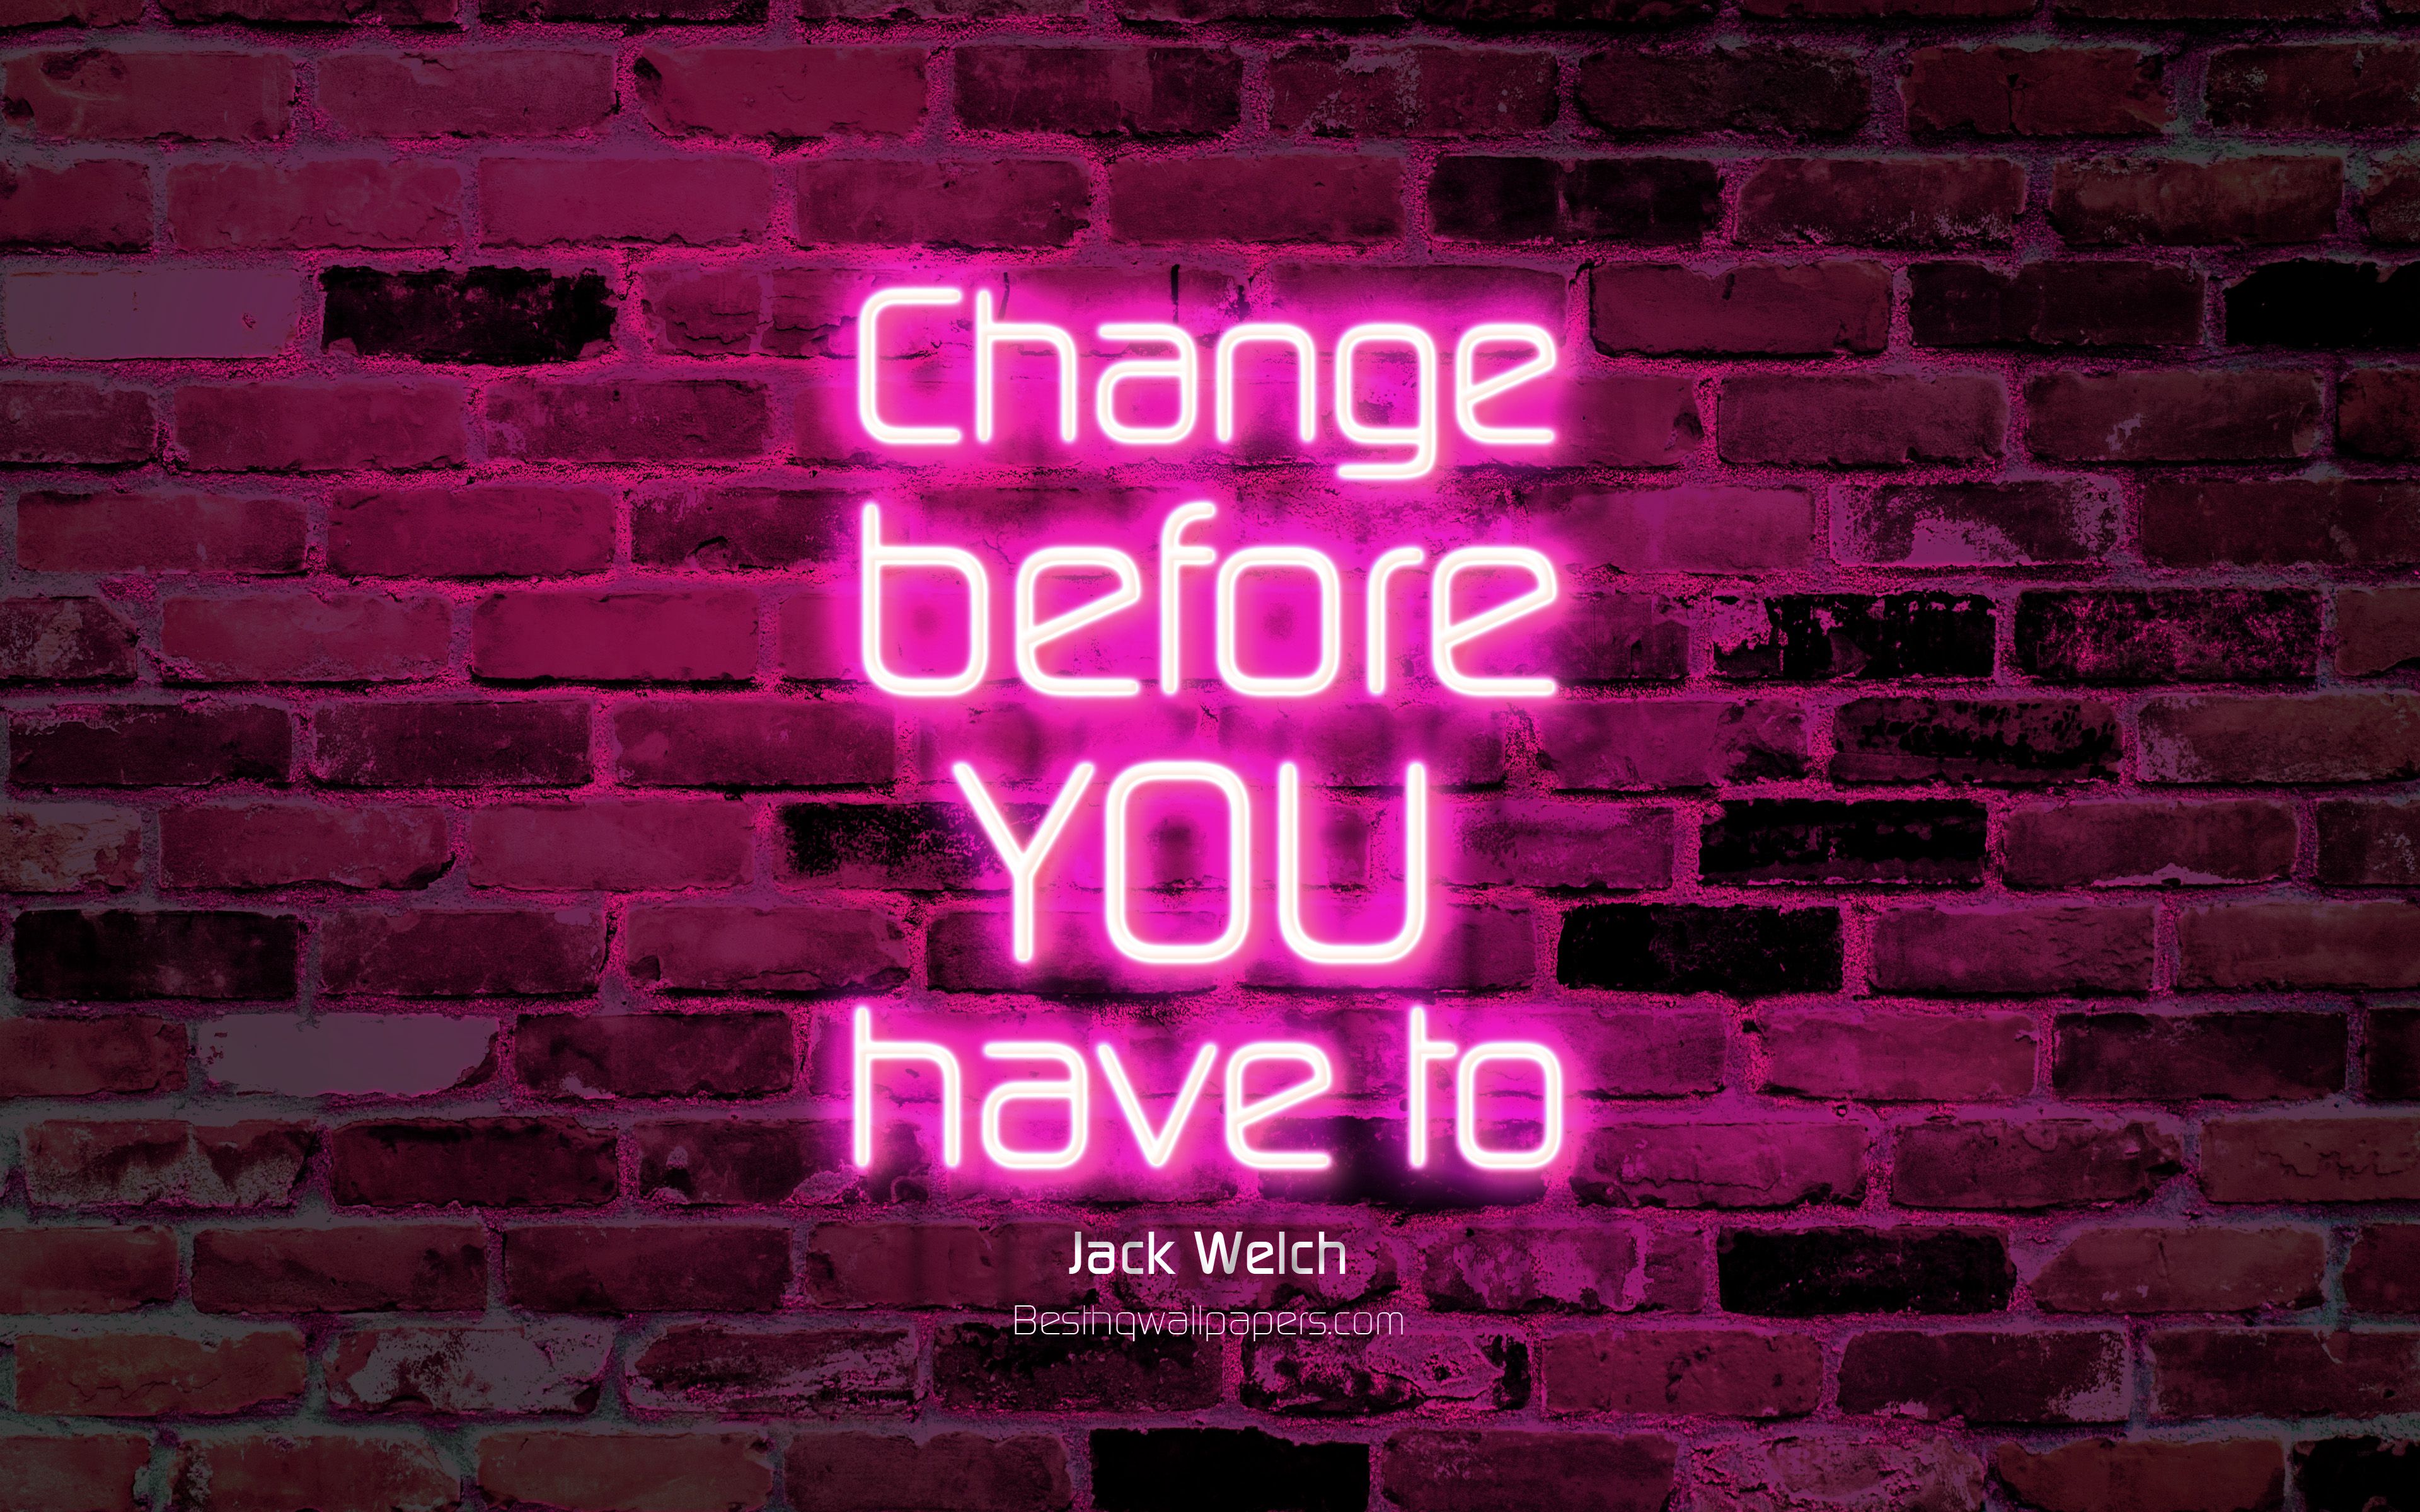 Download wallpaper Change before you have to, 4k, purple brick wall, Jack Welch Quotes, neon text, inspiration, Jack Welch, quotes about change for desktop with resolution 3840x2400. High Quality HD picture wallpaper